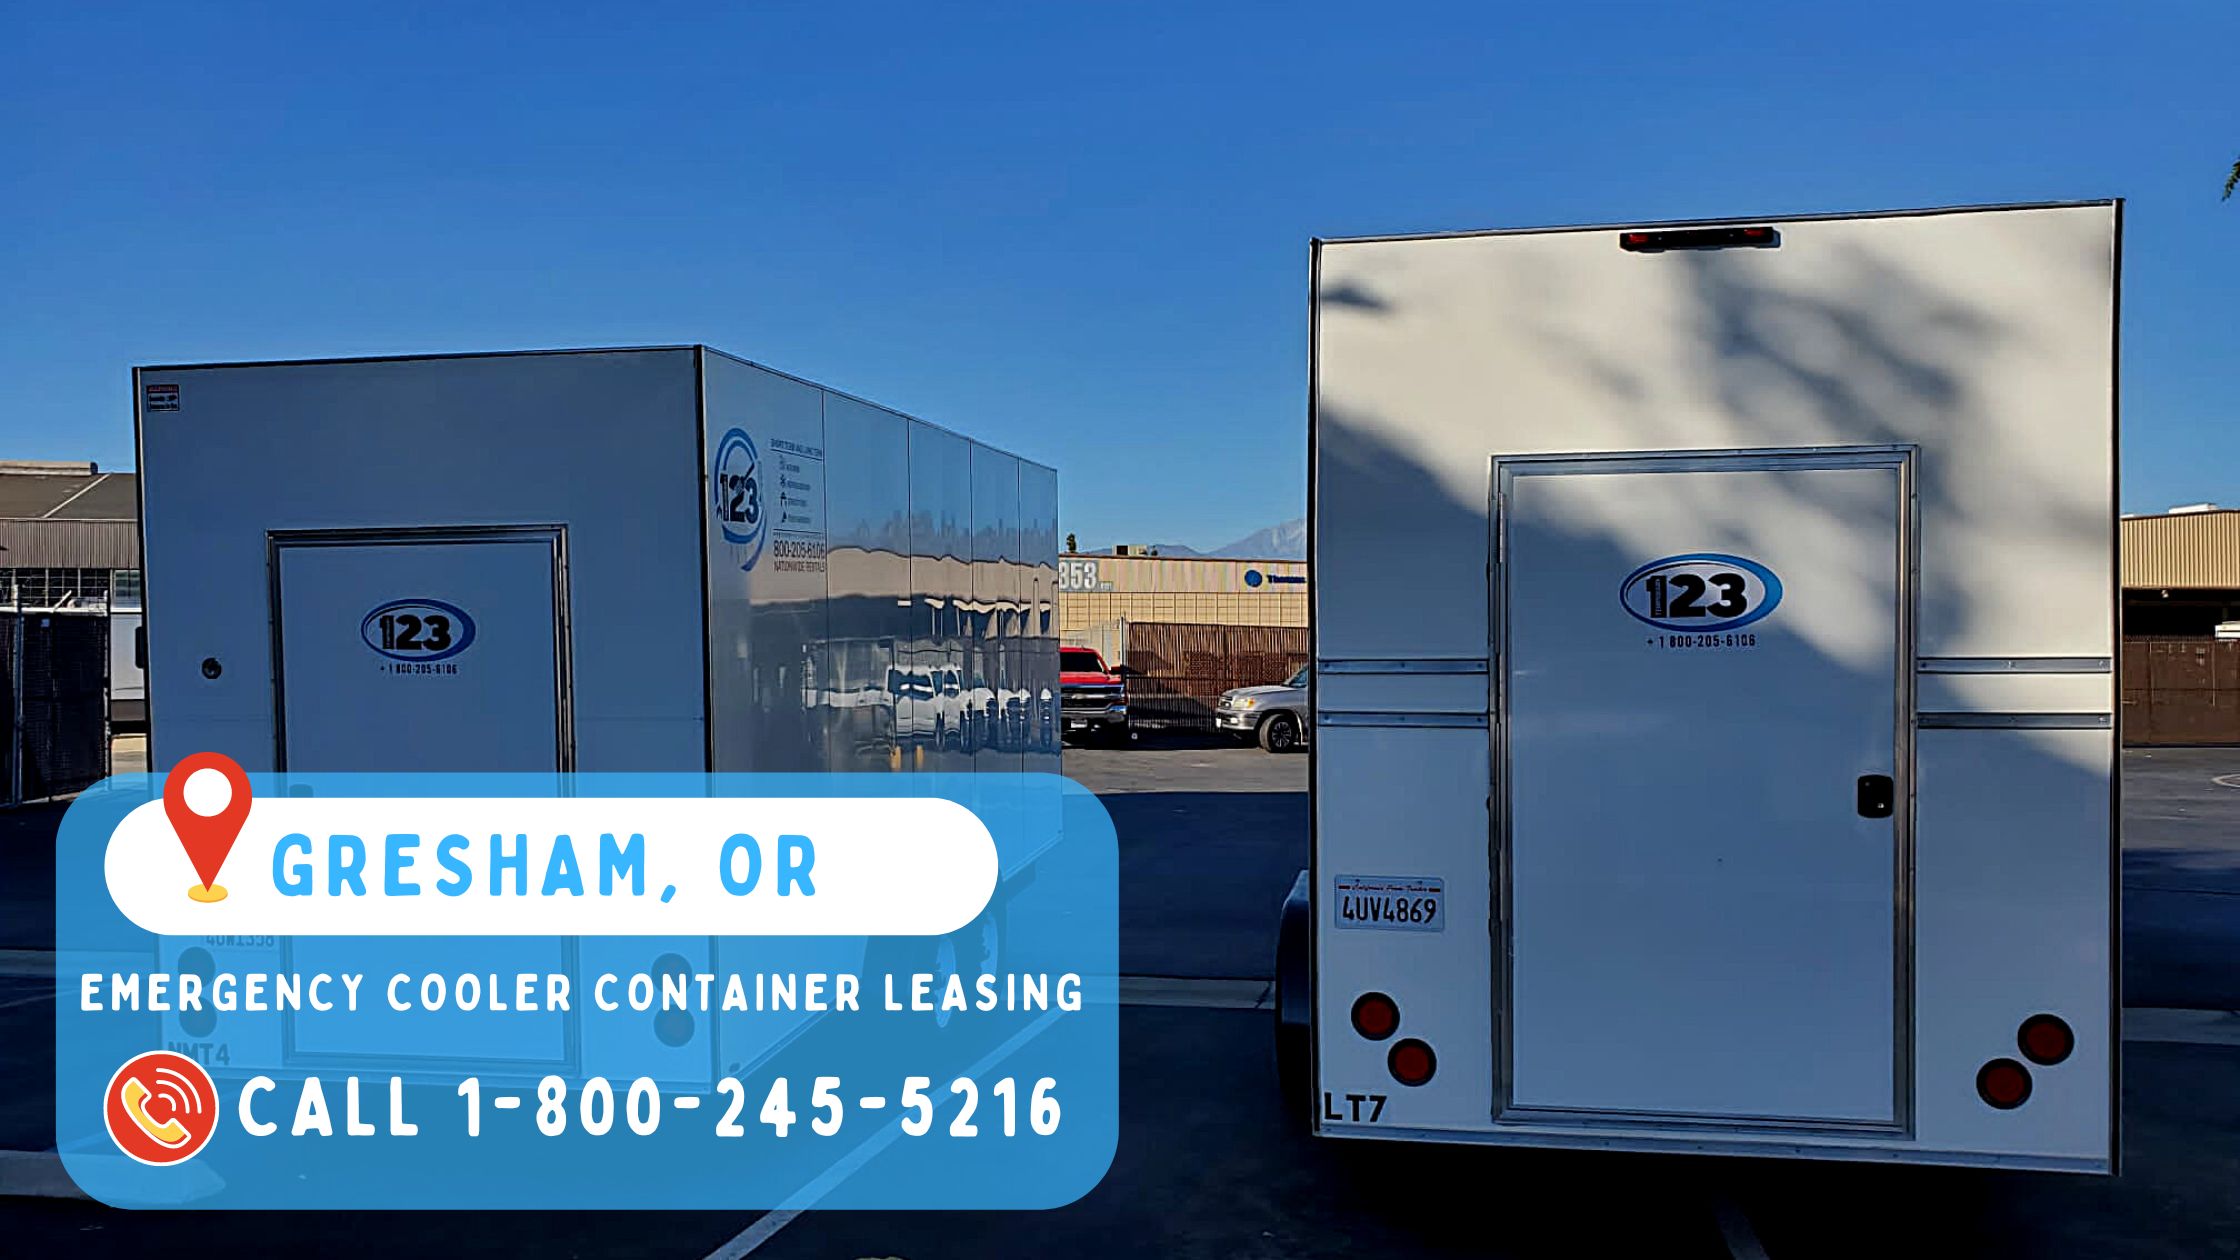 Emergency Cooler Container Leasing in Gresham